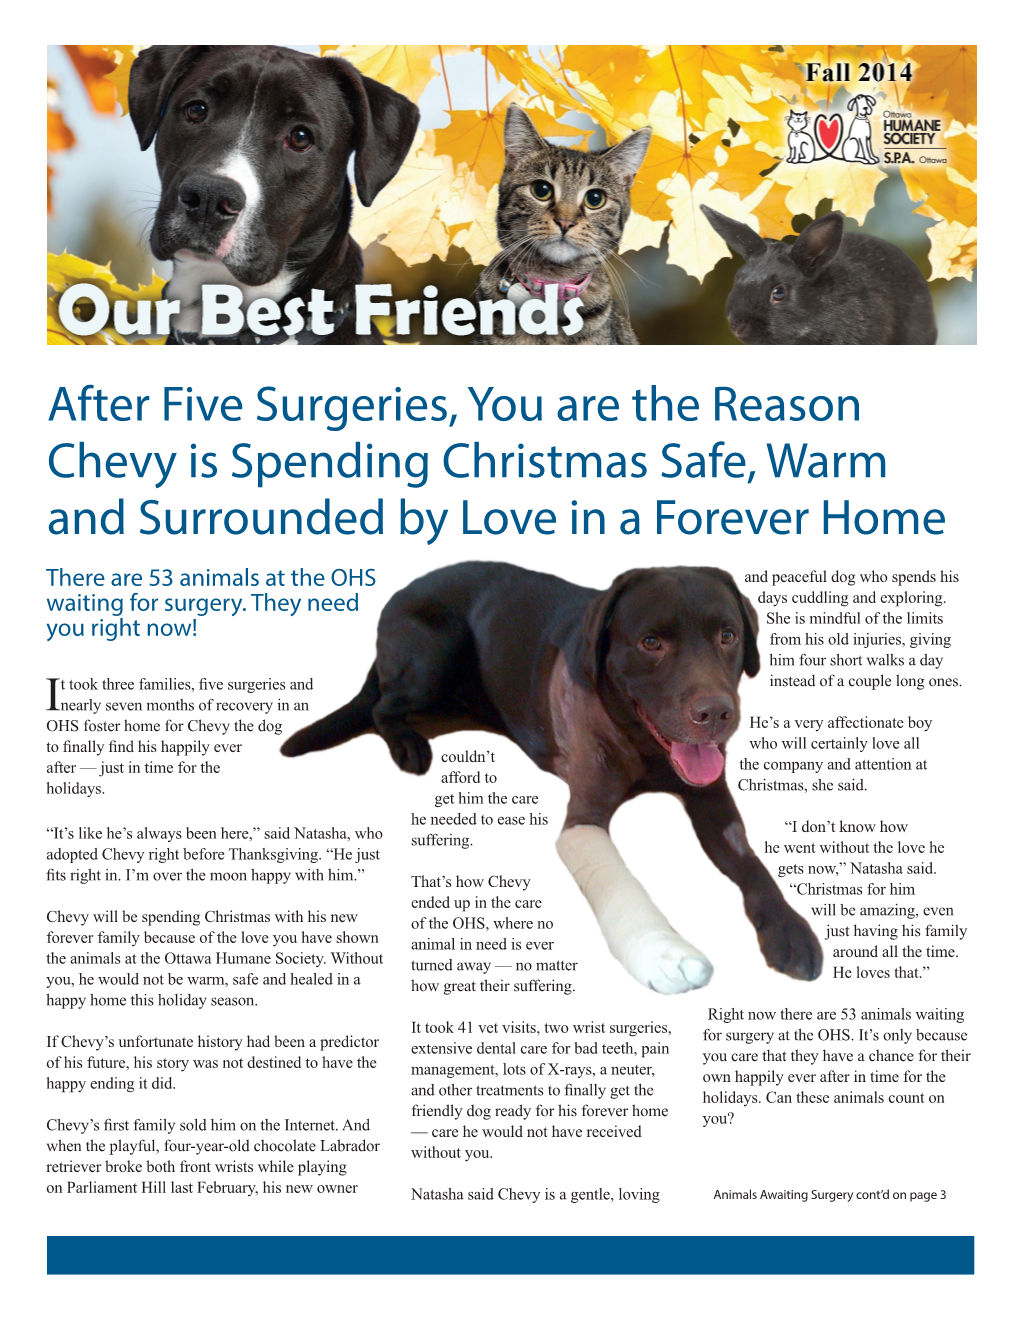 After Five Surgeries, You Are the Reason Chevy Is Spending Christmas Safe, Warm and Surrounded by Love in a Forever Home